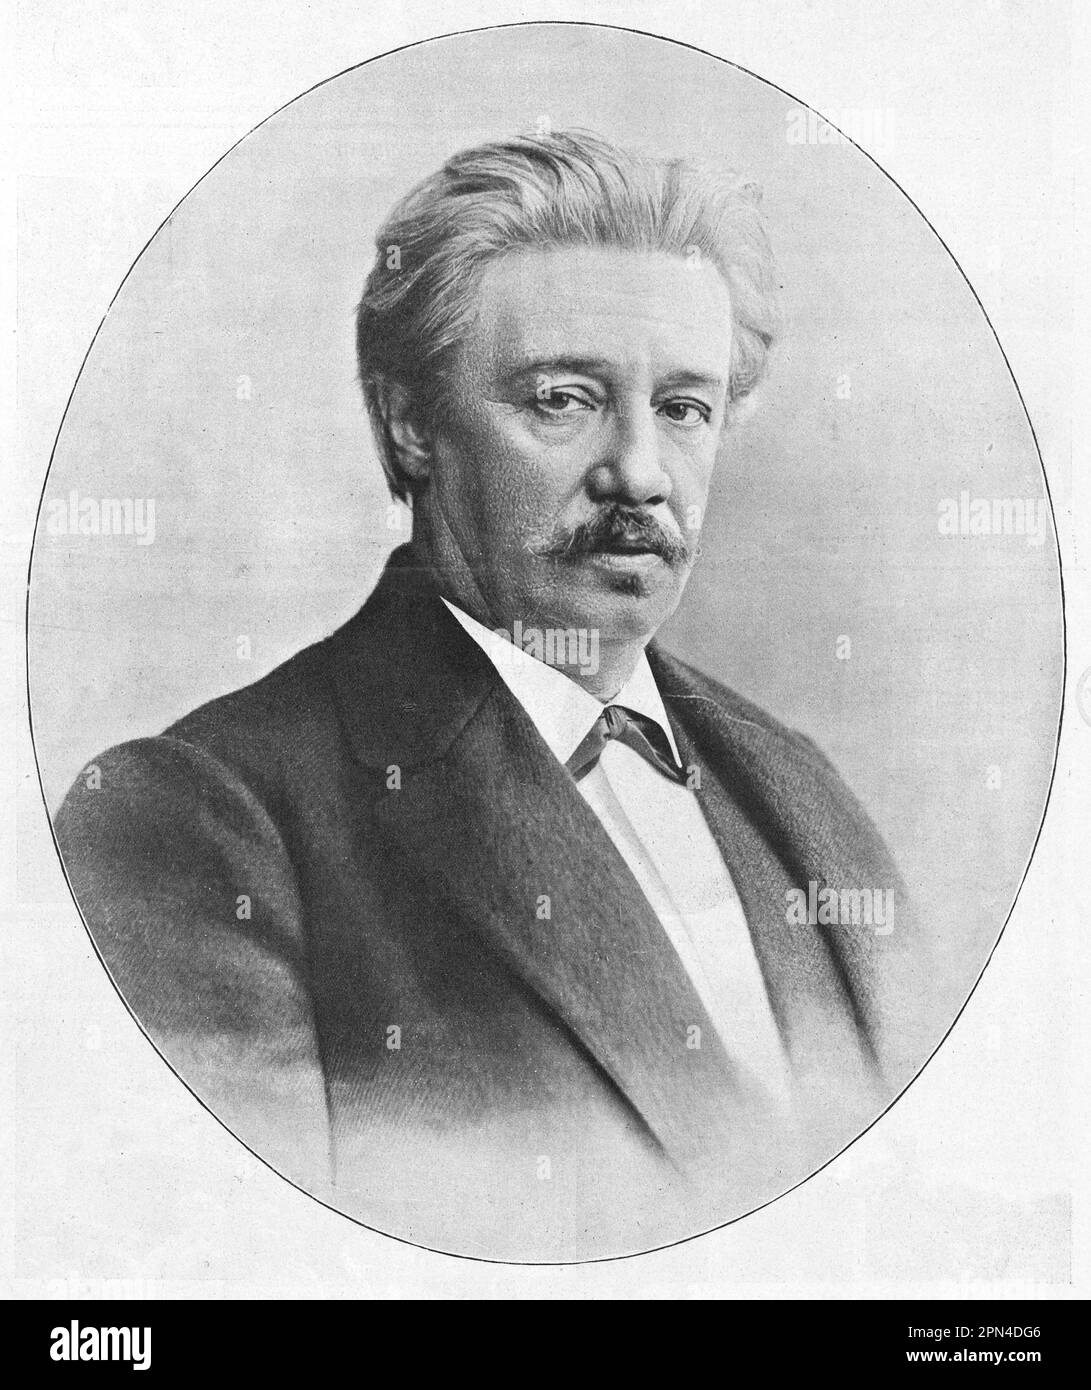 Prov Mikhailovich Sadovsky (Jr.). Photo from 1910. Prov Mikhailovich Sadovsky (junior) (1874 - 1947) - Russian, Soviet actor, theater director. People's Artist of the USSR (1937). Laureate of the Stalin Prize (1943). Cavalier of two Orders of Lenin (1937, 1945). Stock Photo